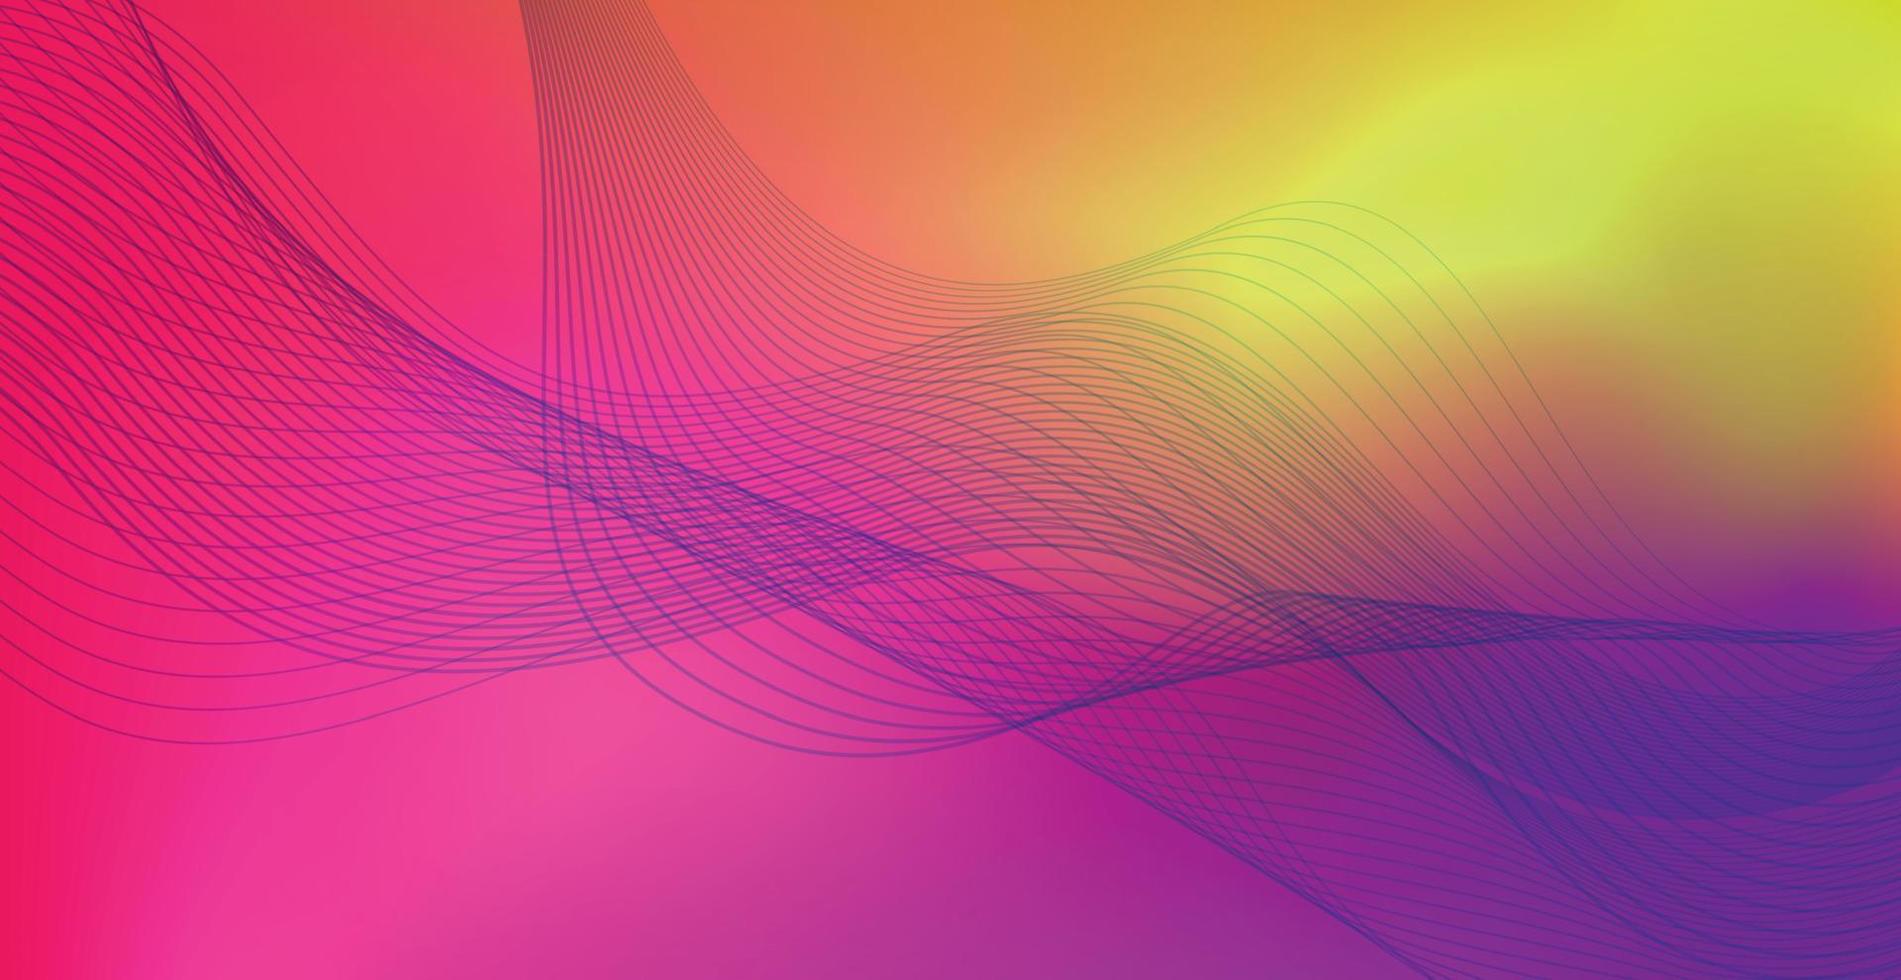 Panoramic colorful abstract stylish multi background with wavy lines - Vector